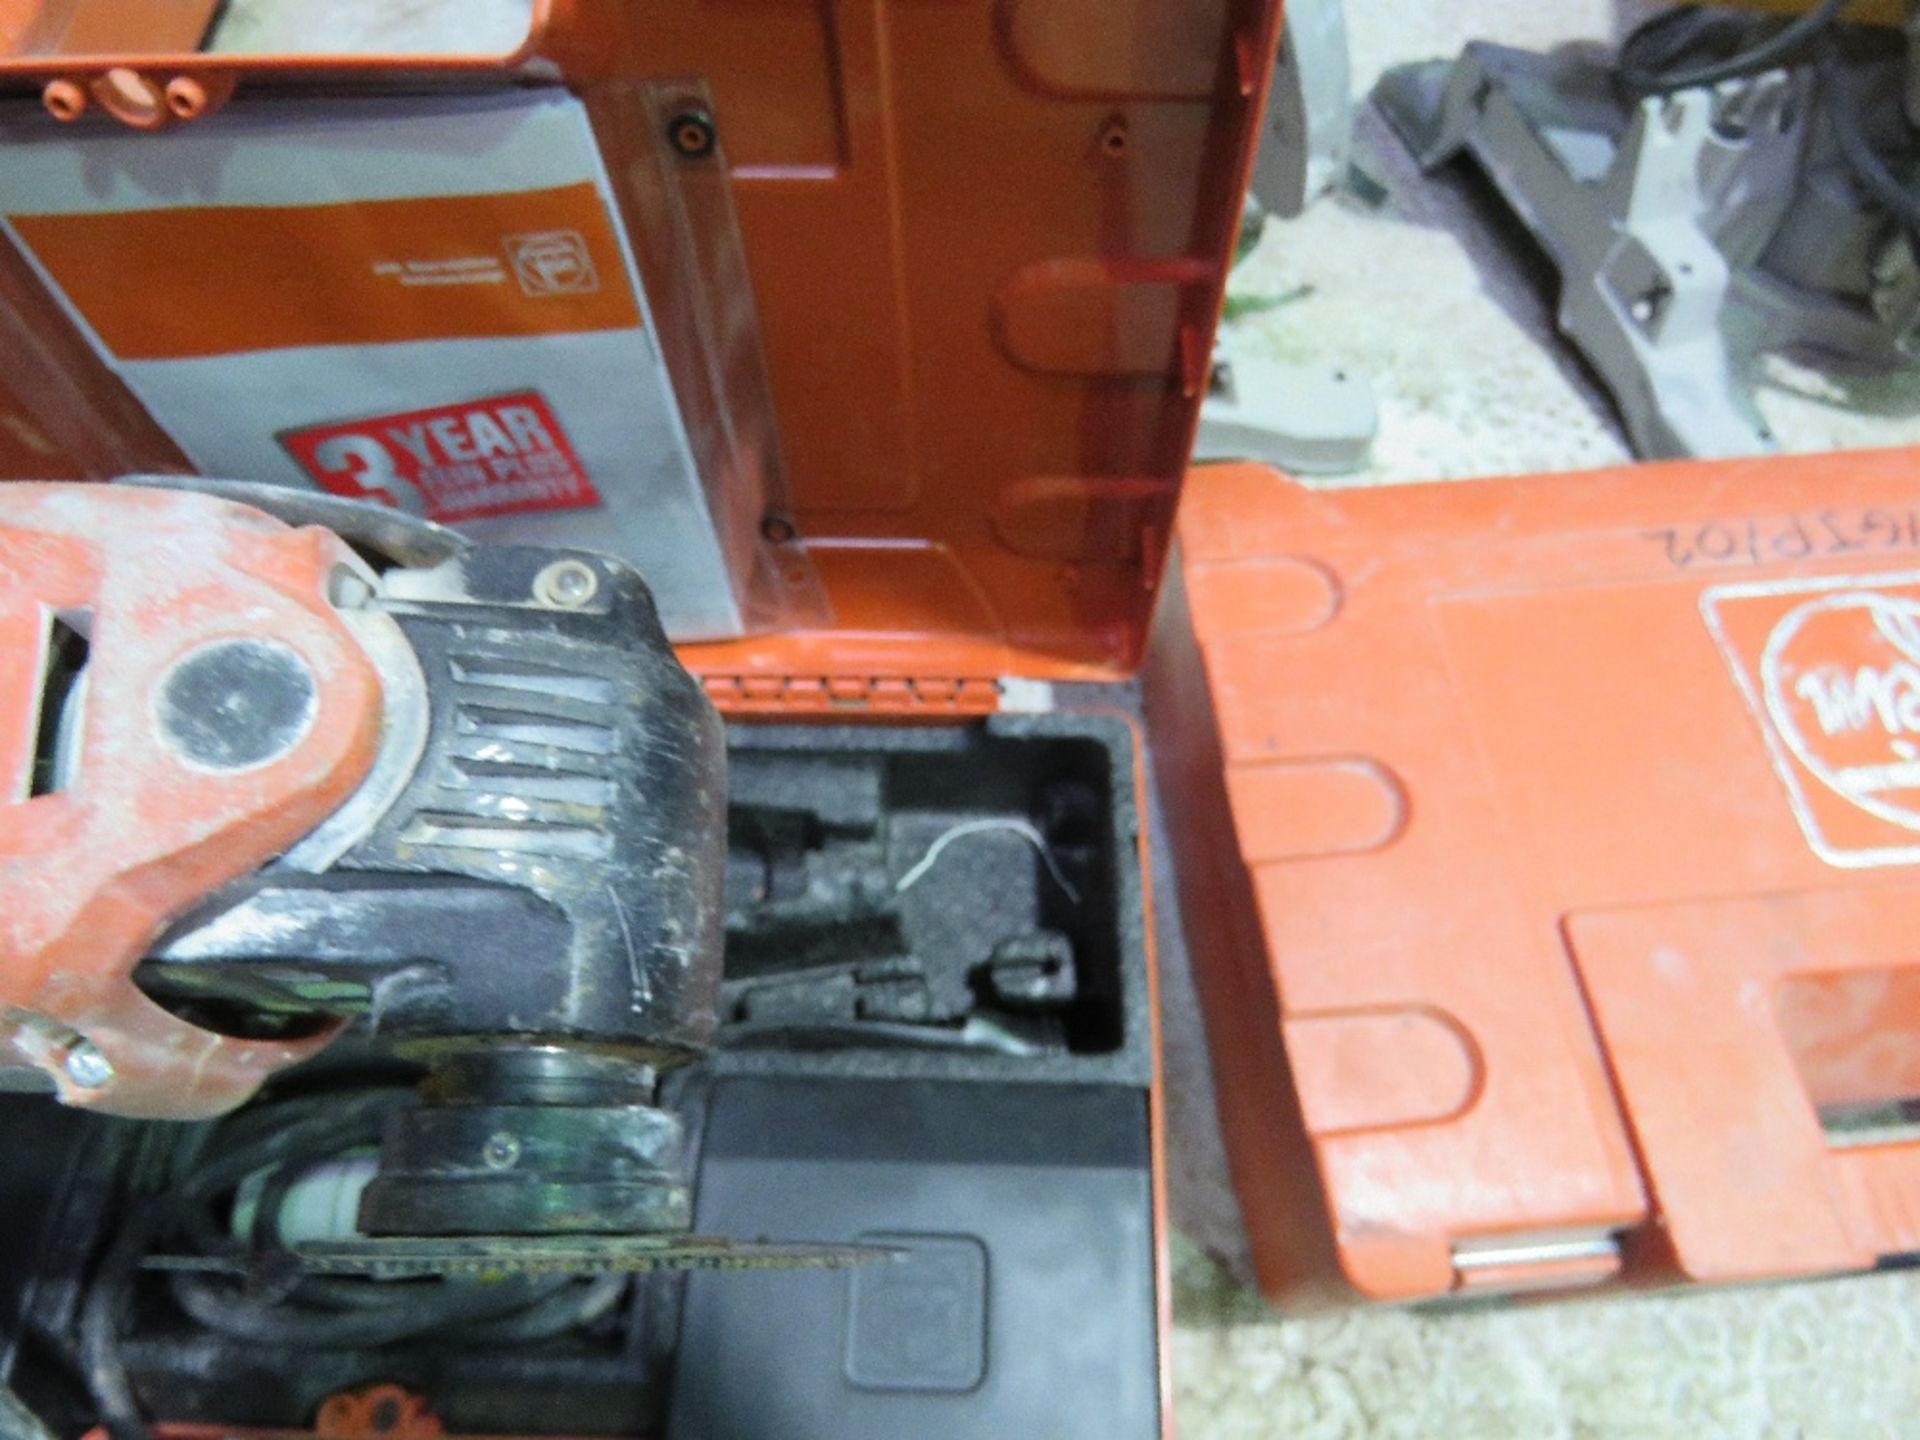 FEIN 110VOLT MULTI TOOL IN A BOX. DIRECT FROM LOCAL COMPANY. - Image 4 of 4